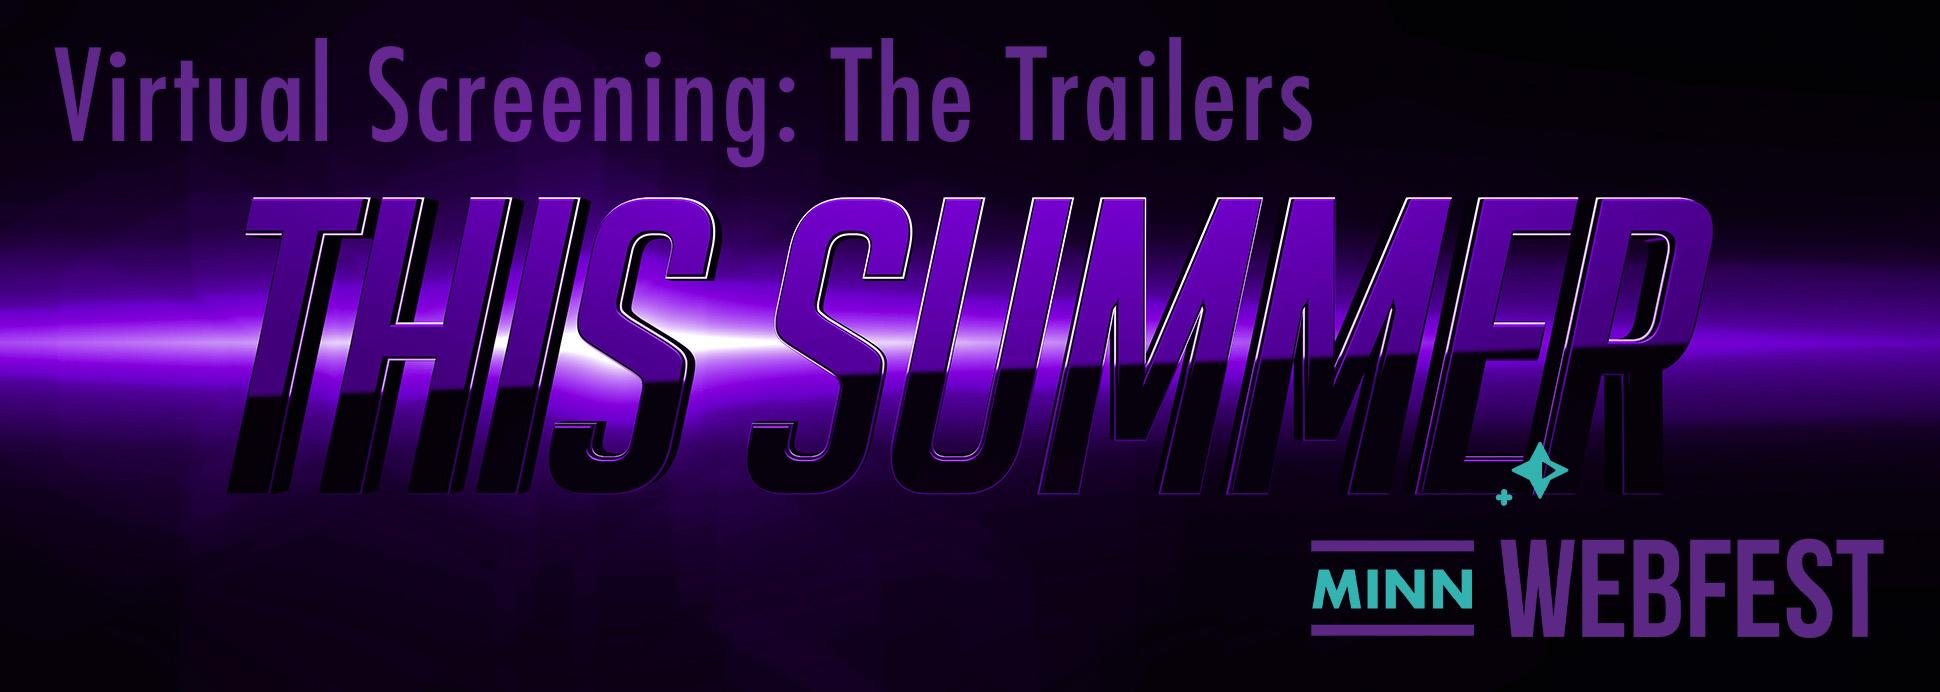 The Trailers